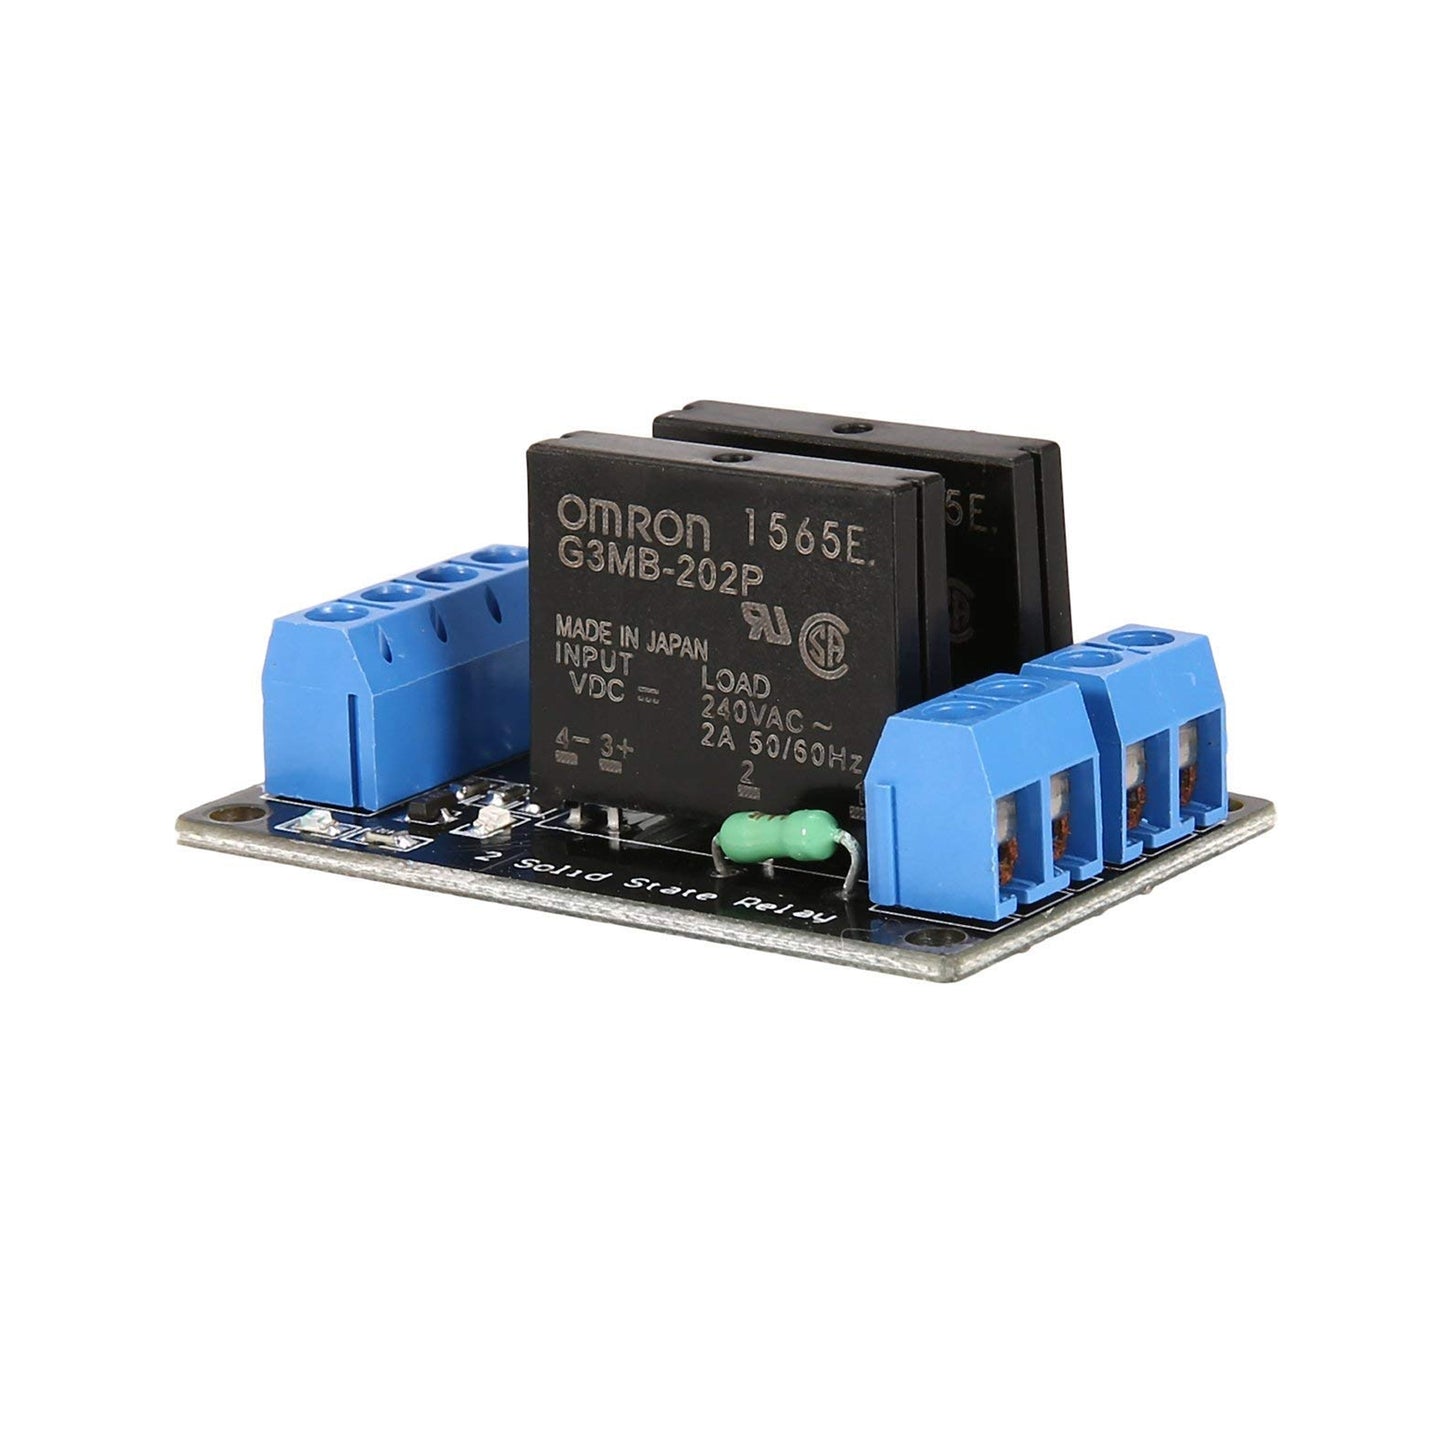 2 Channel 24V Relay Module Solid State Low Level SSR DC Control 250V 2A Solid State Relay Module with Resistive Fuse - RS3697 - REES52